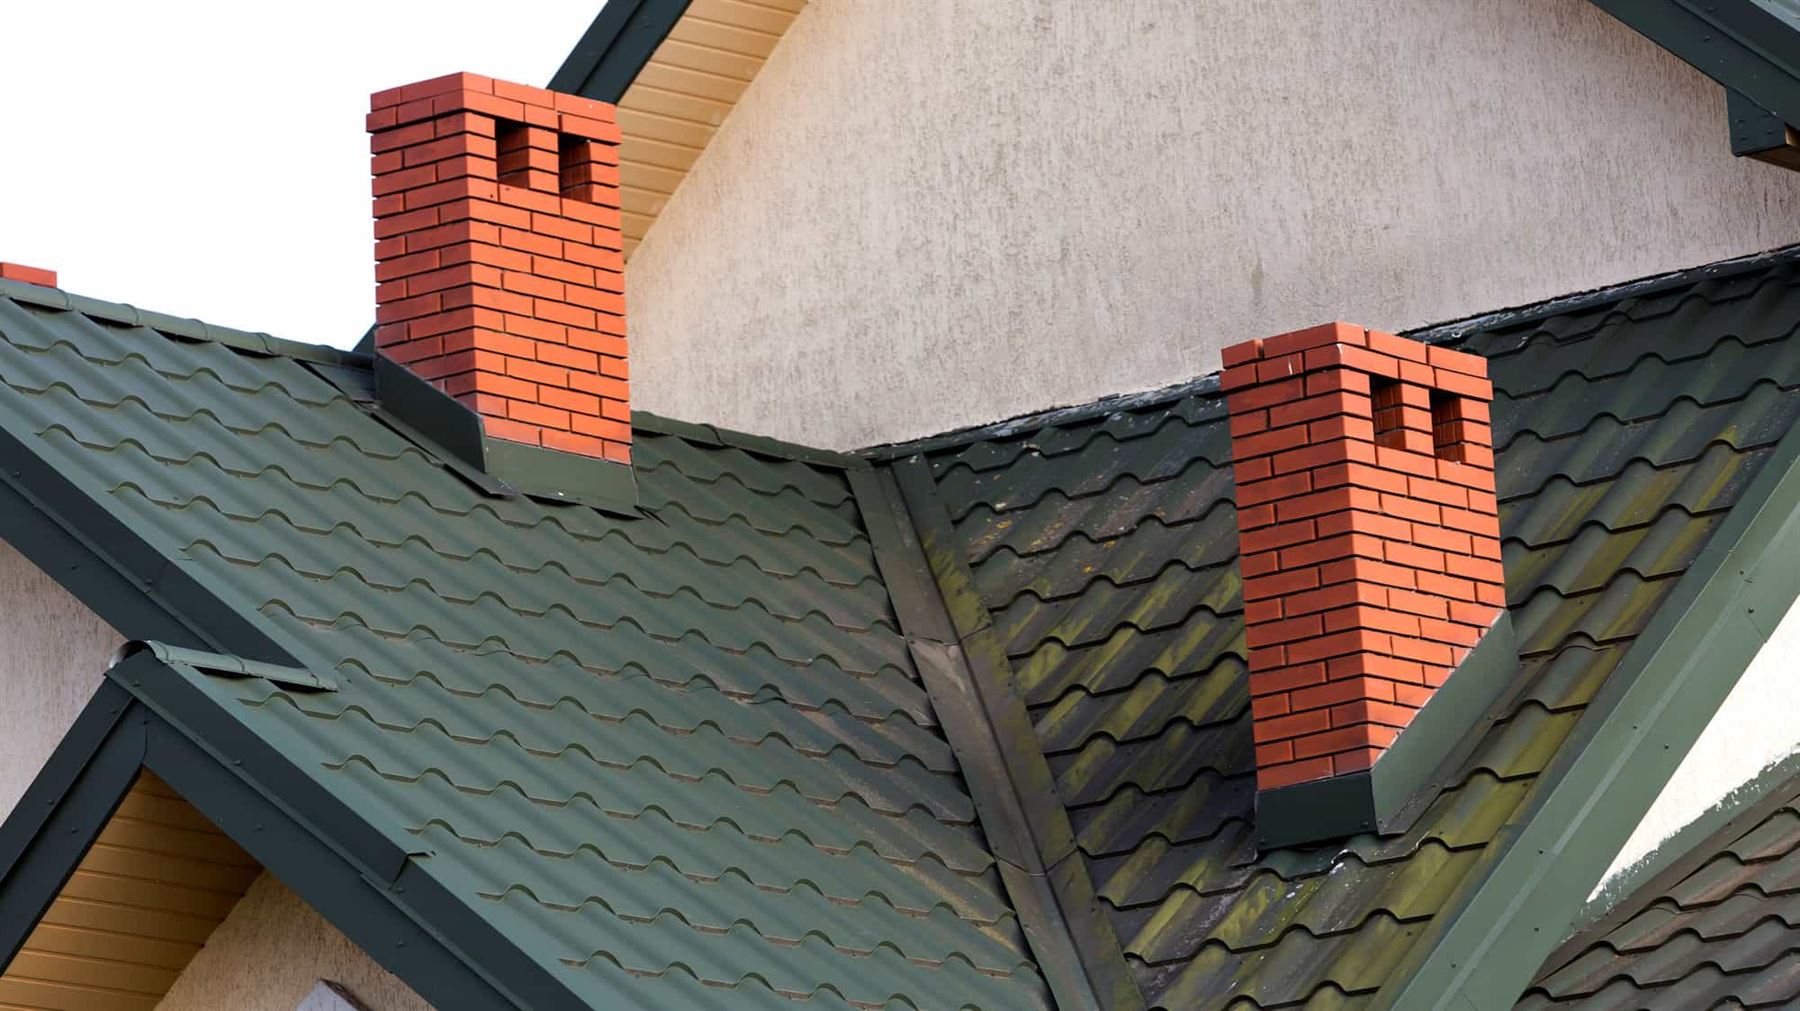 WaterTight Roofing